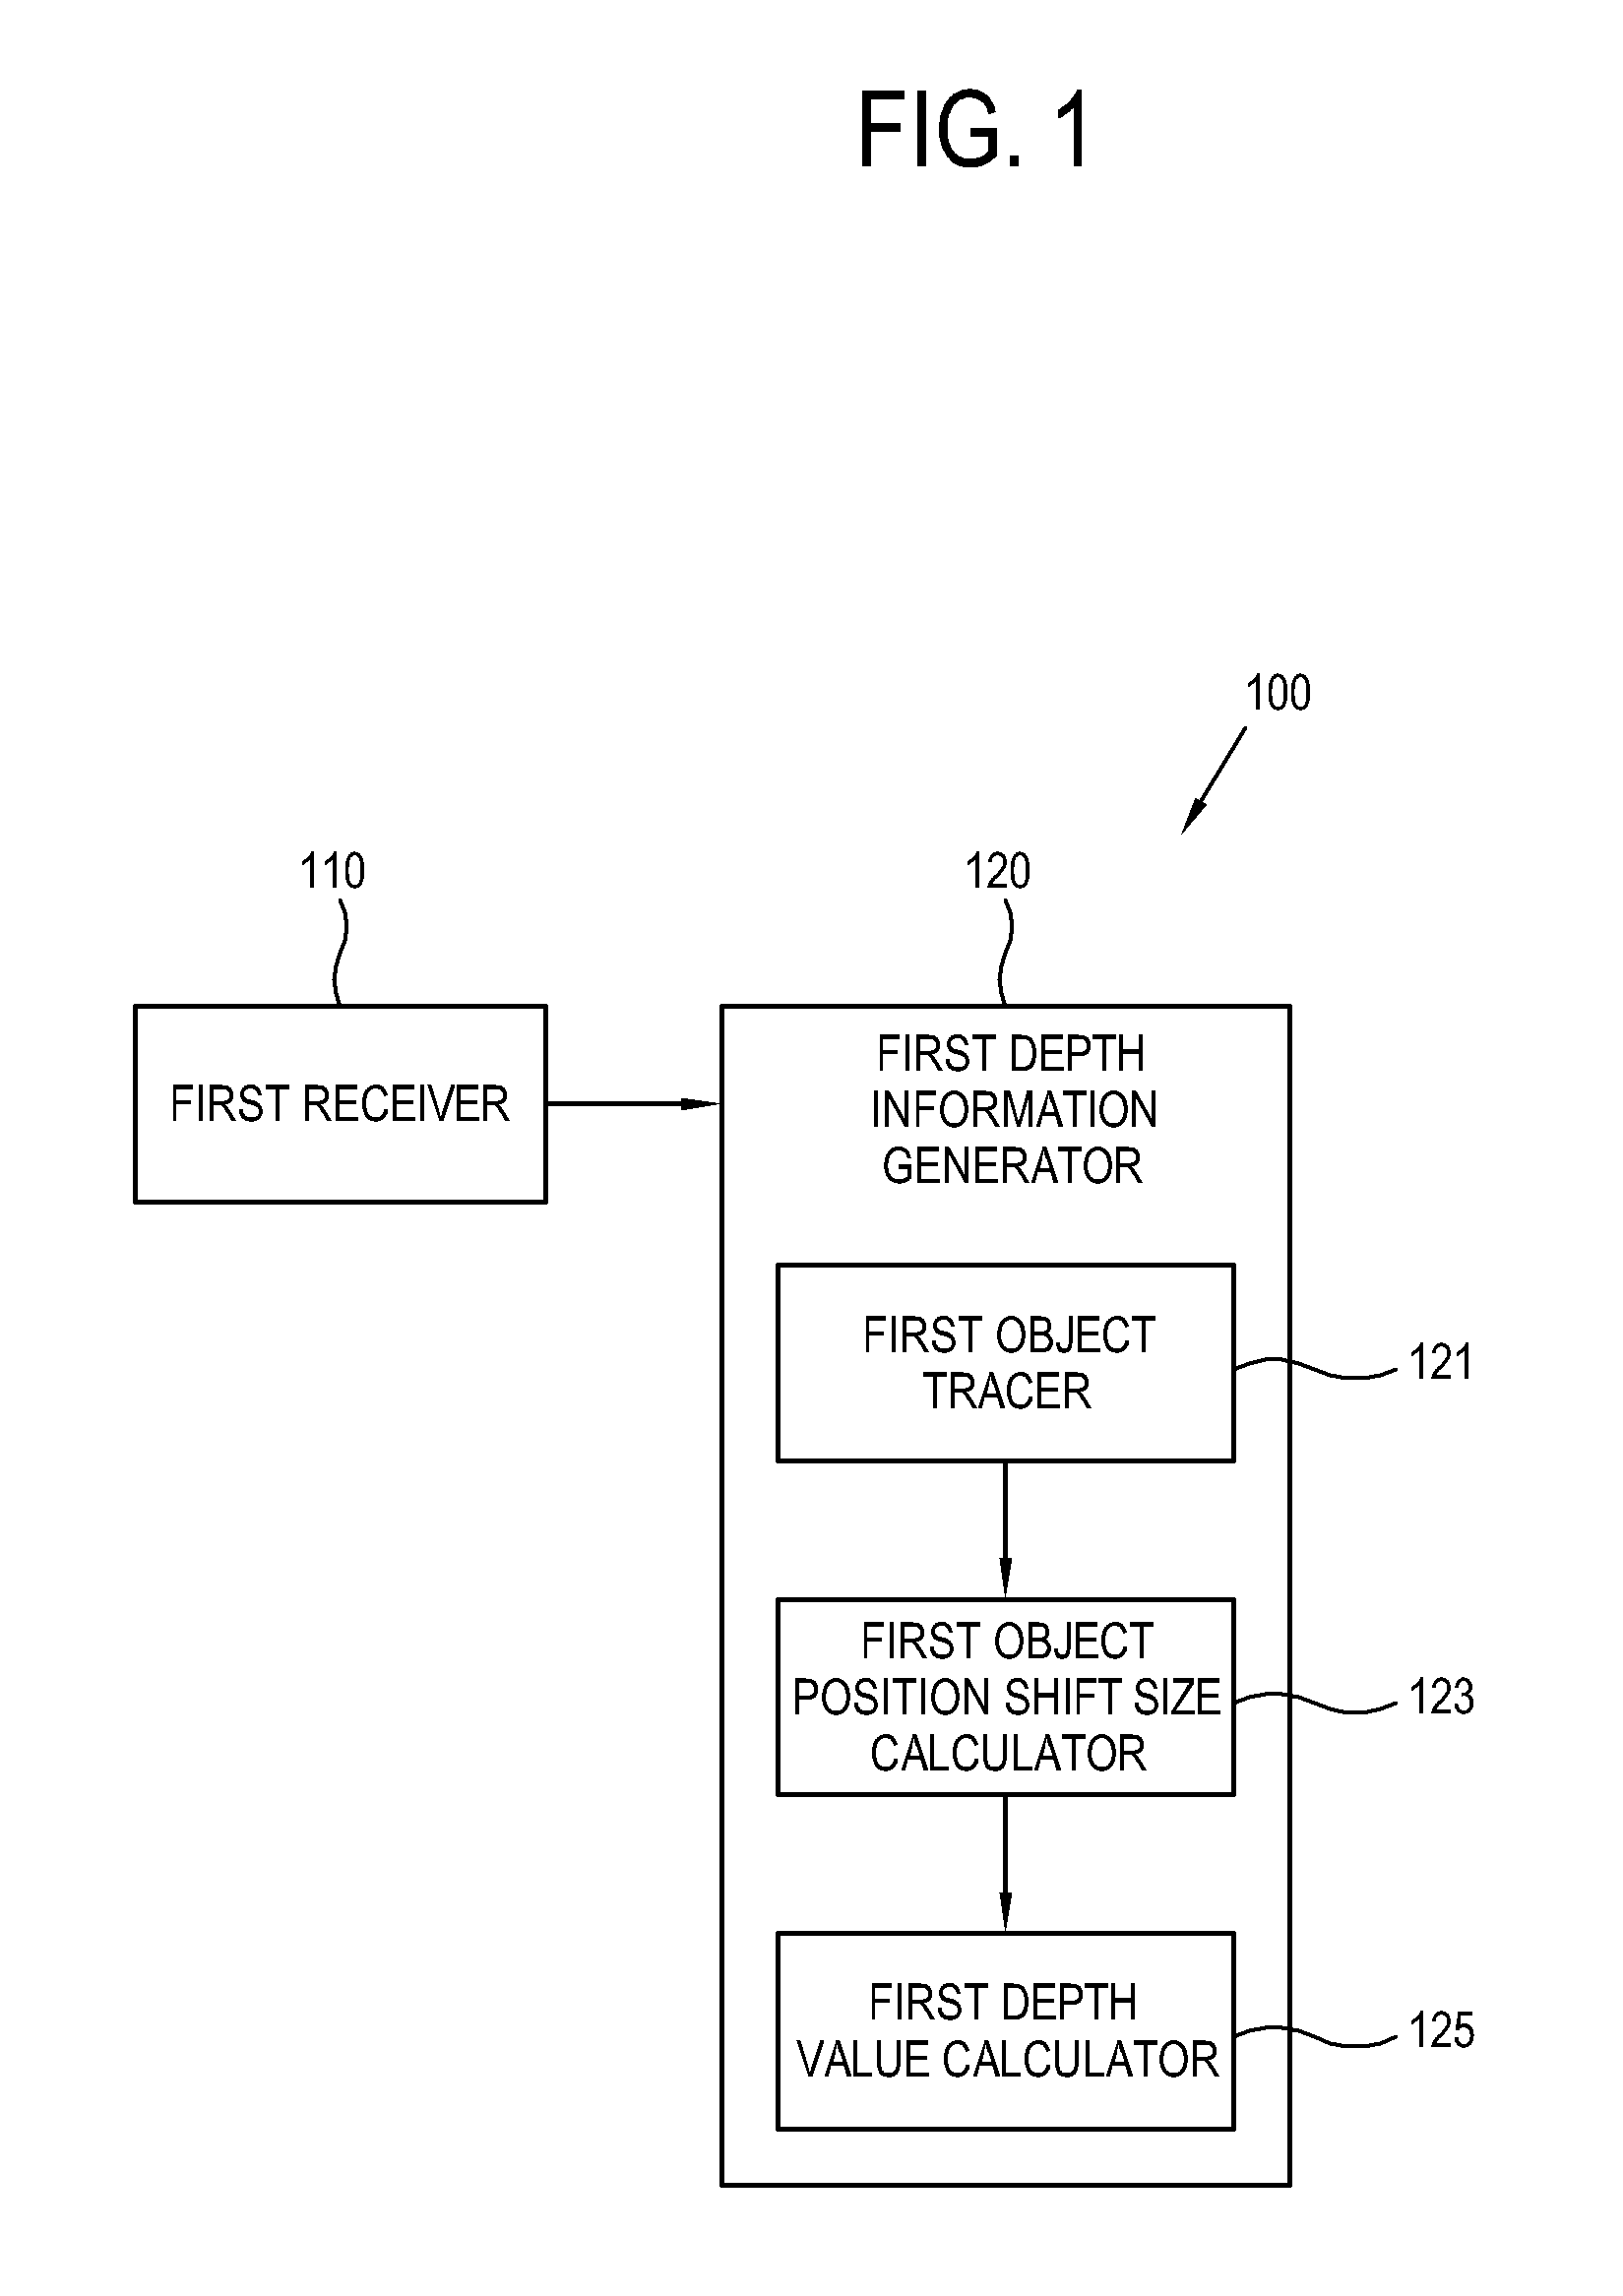 Apparatus and method for generating depth information